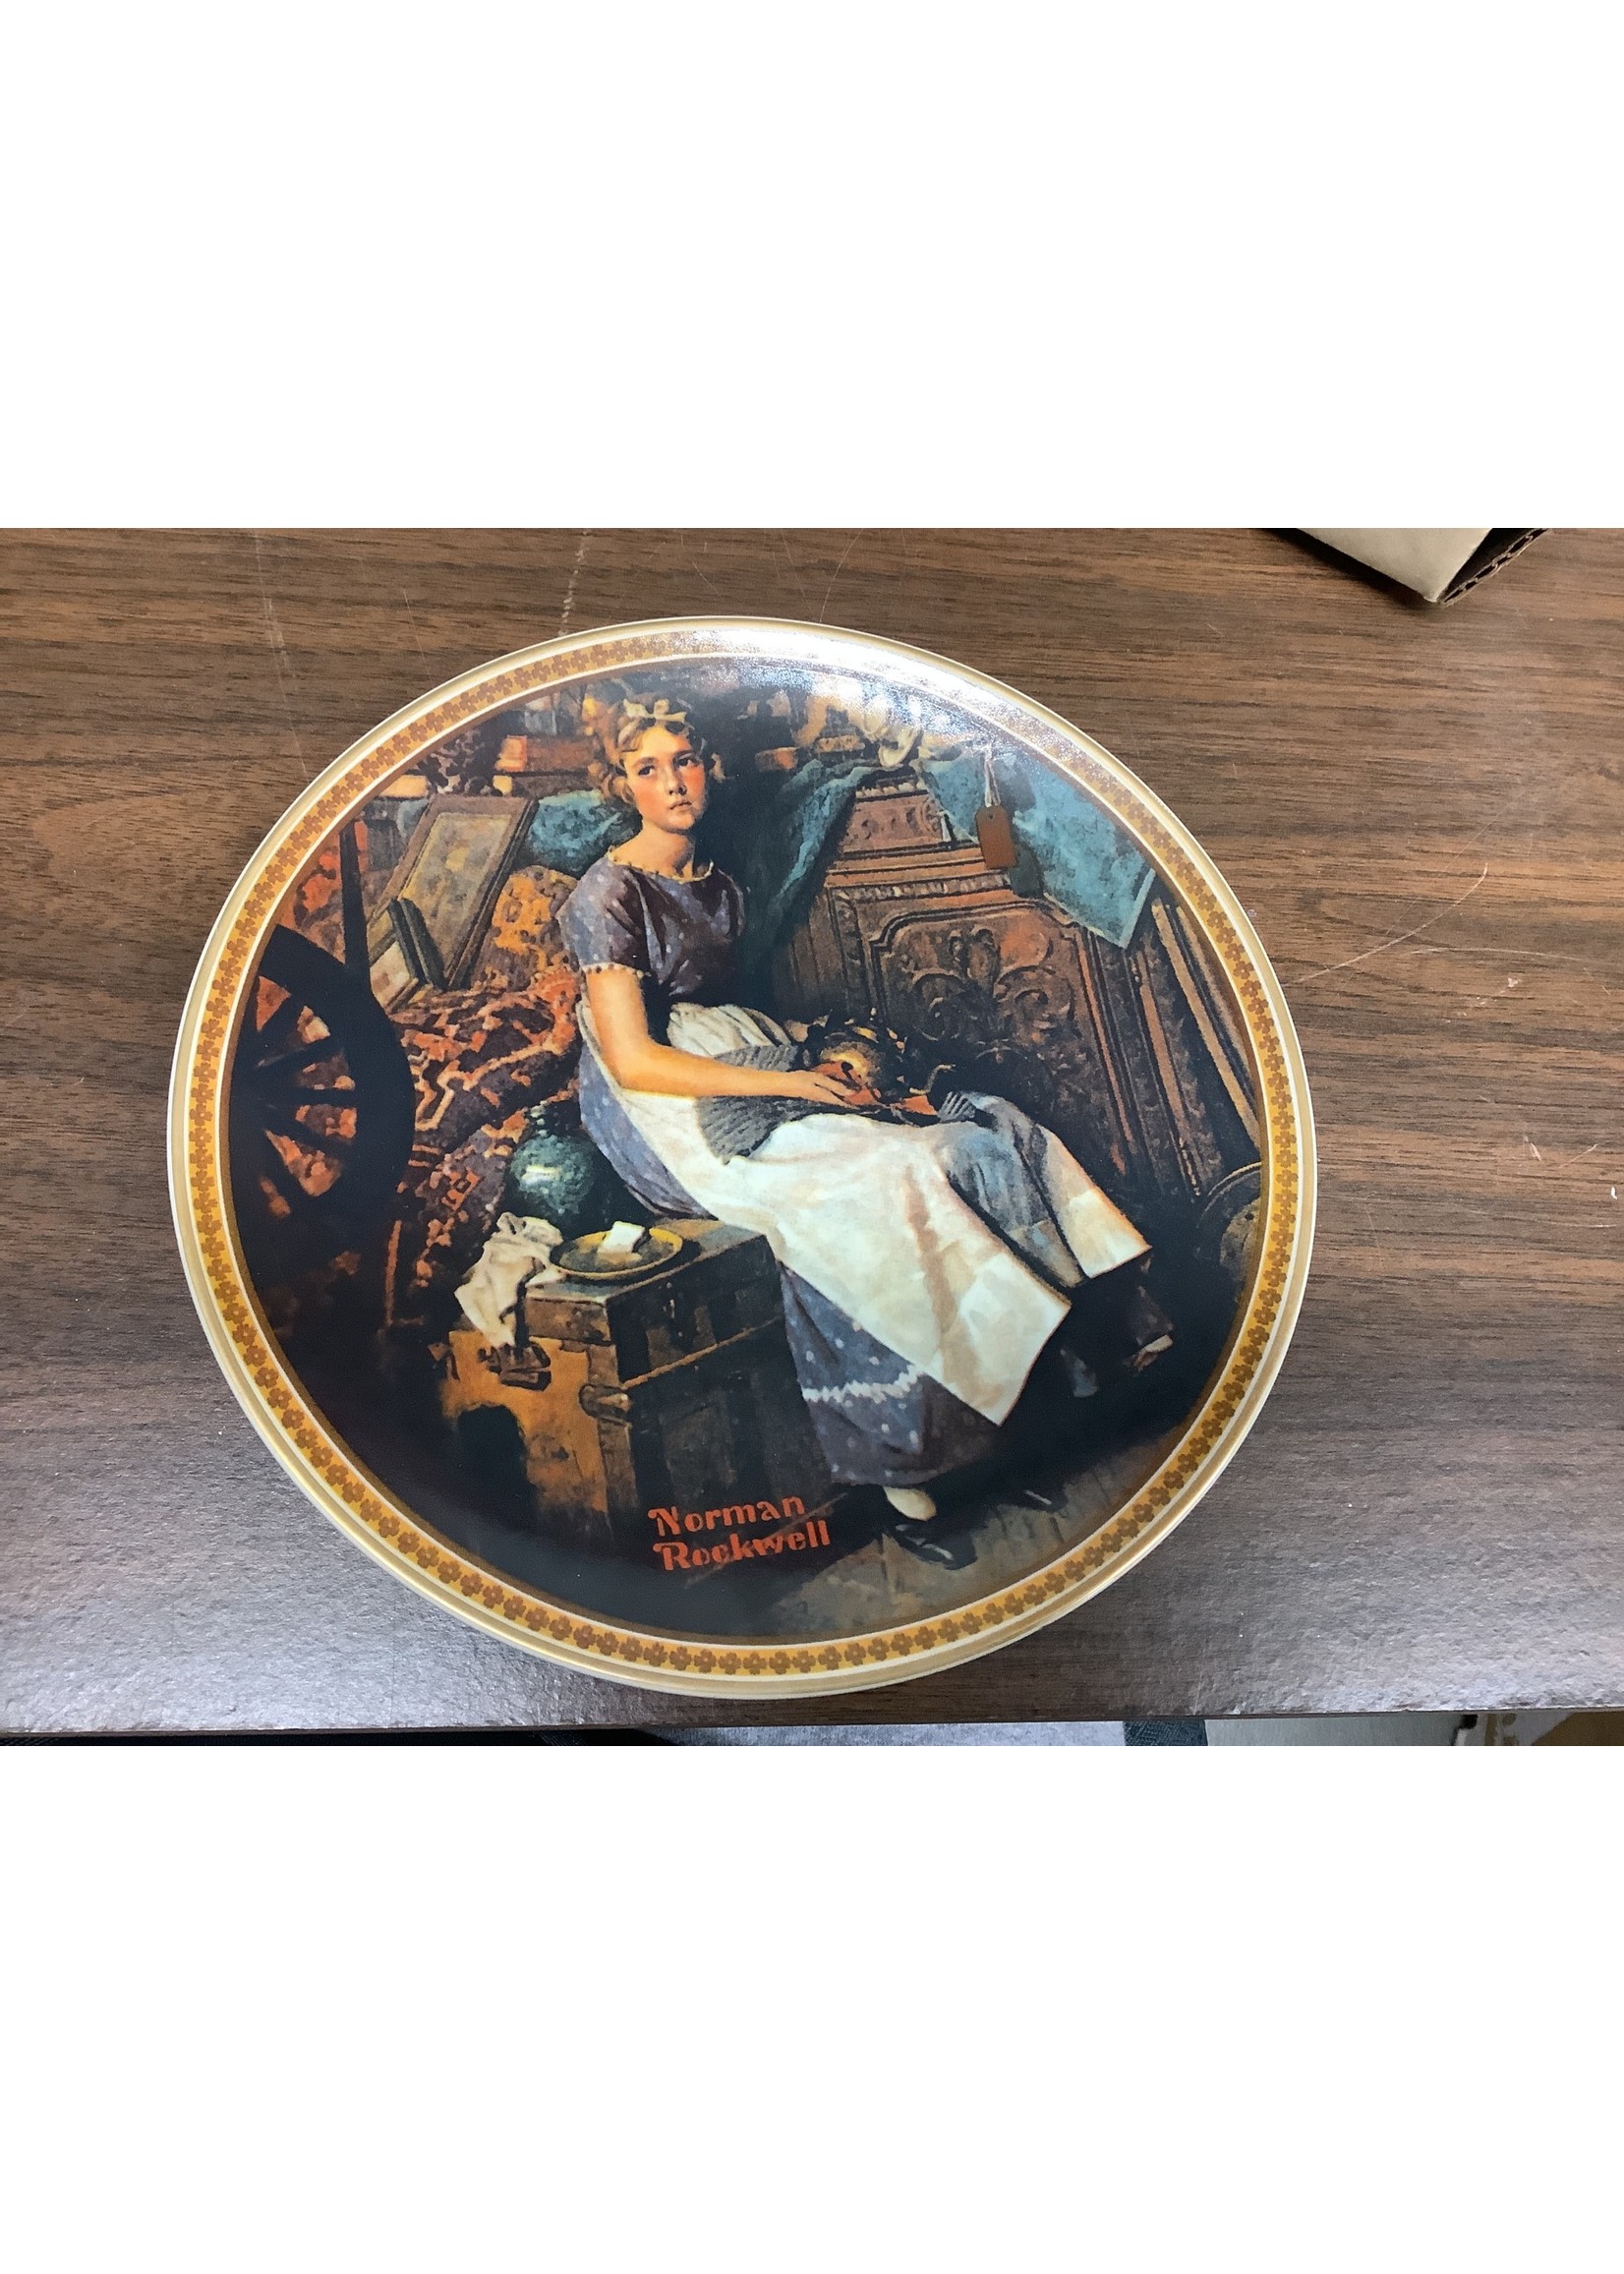 The Bradford Exchange Collectors Plate “Dreaming in the Attic” Bradex-Nr. 84-R70-4.1